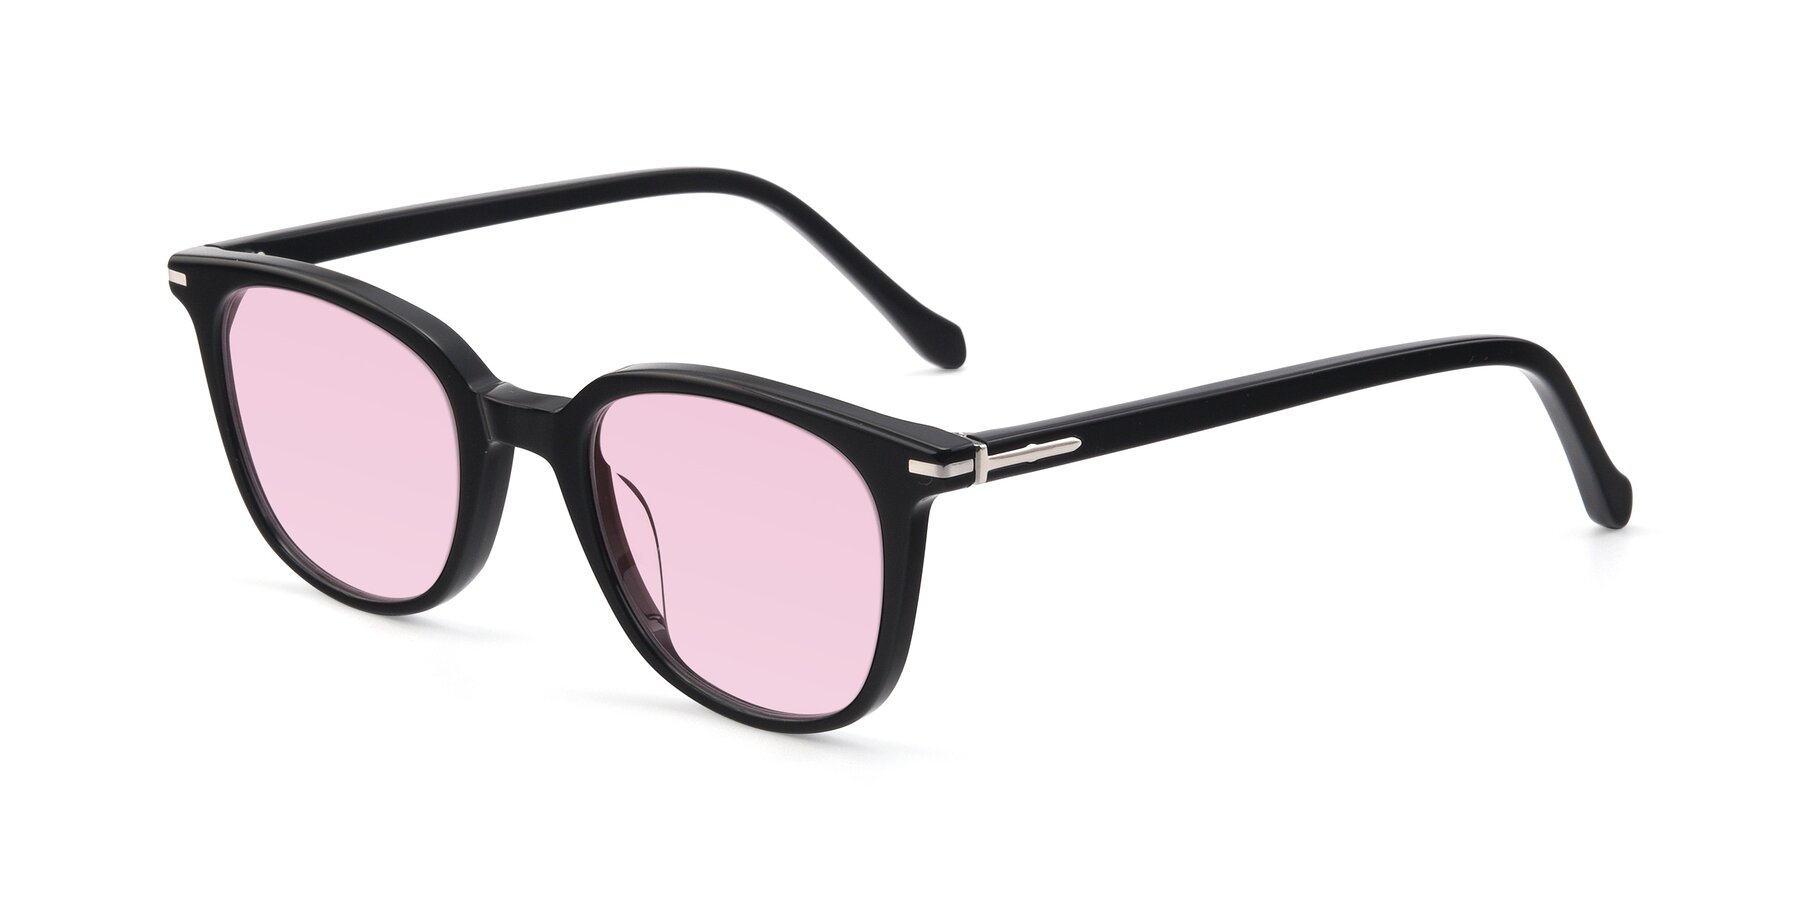 Angle of 17562 in Black with Light Pink Tinted Lenses